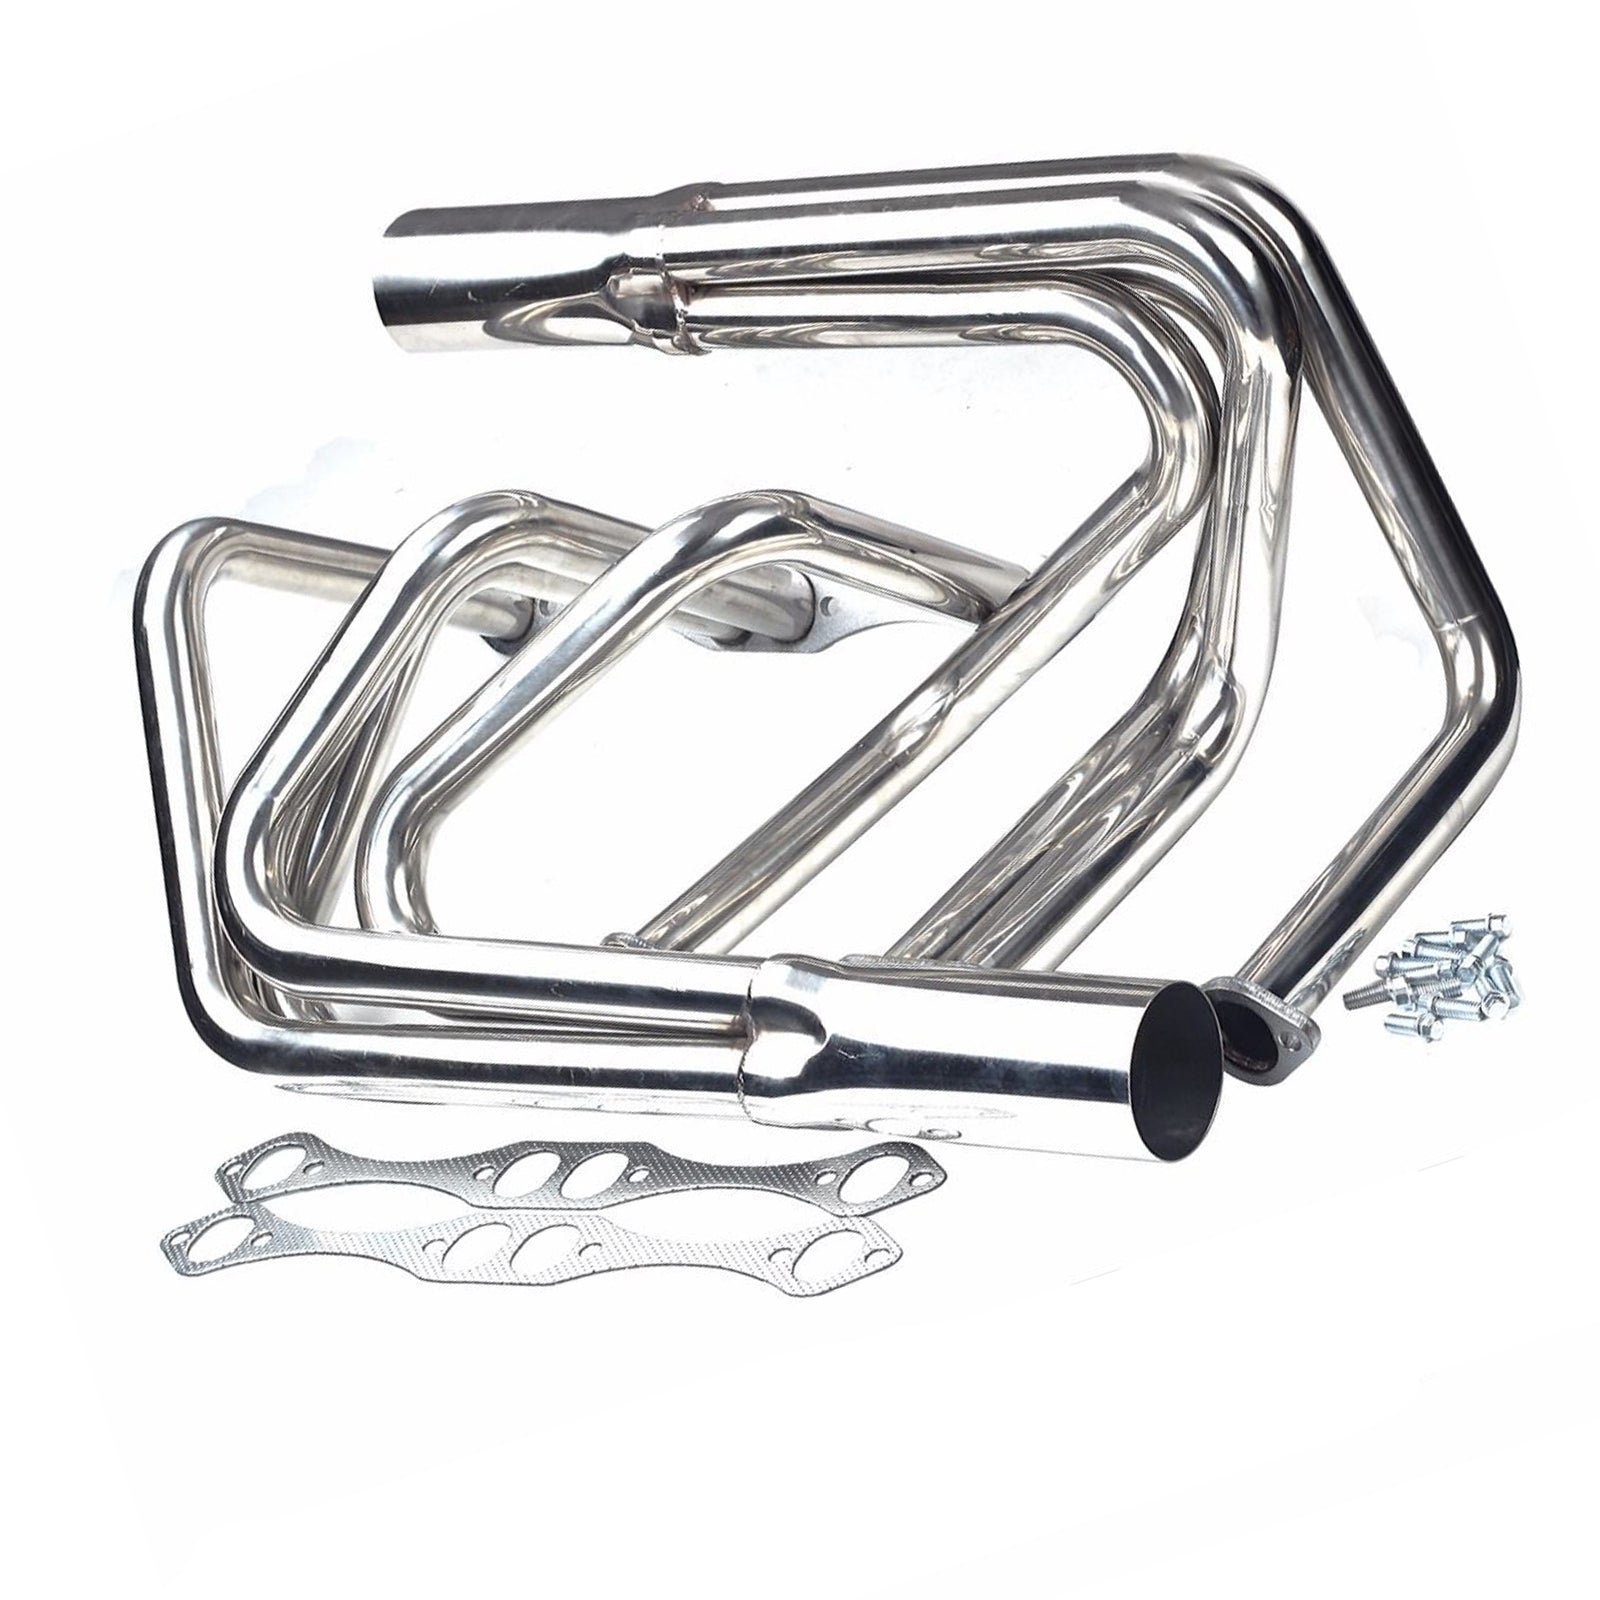 Chevrolet Small Block Roadster Sprint H8069 1-5/8" Stainless Steel Manifold Header